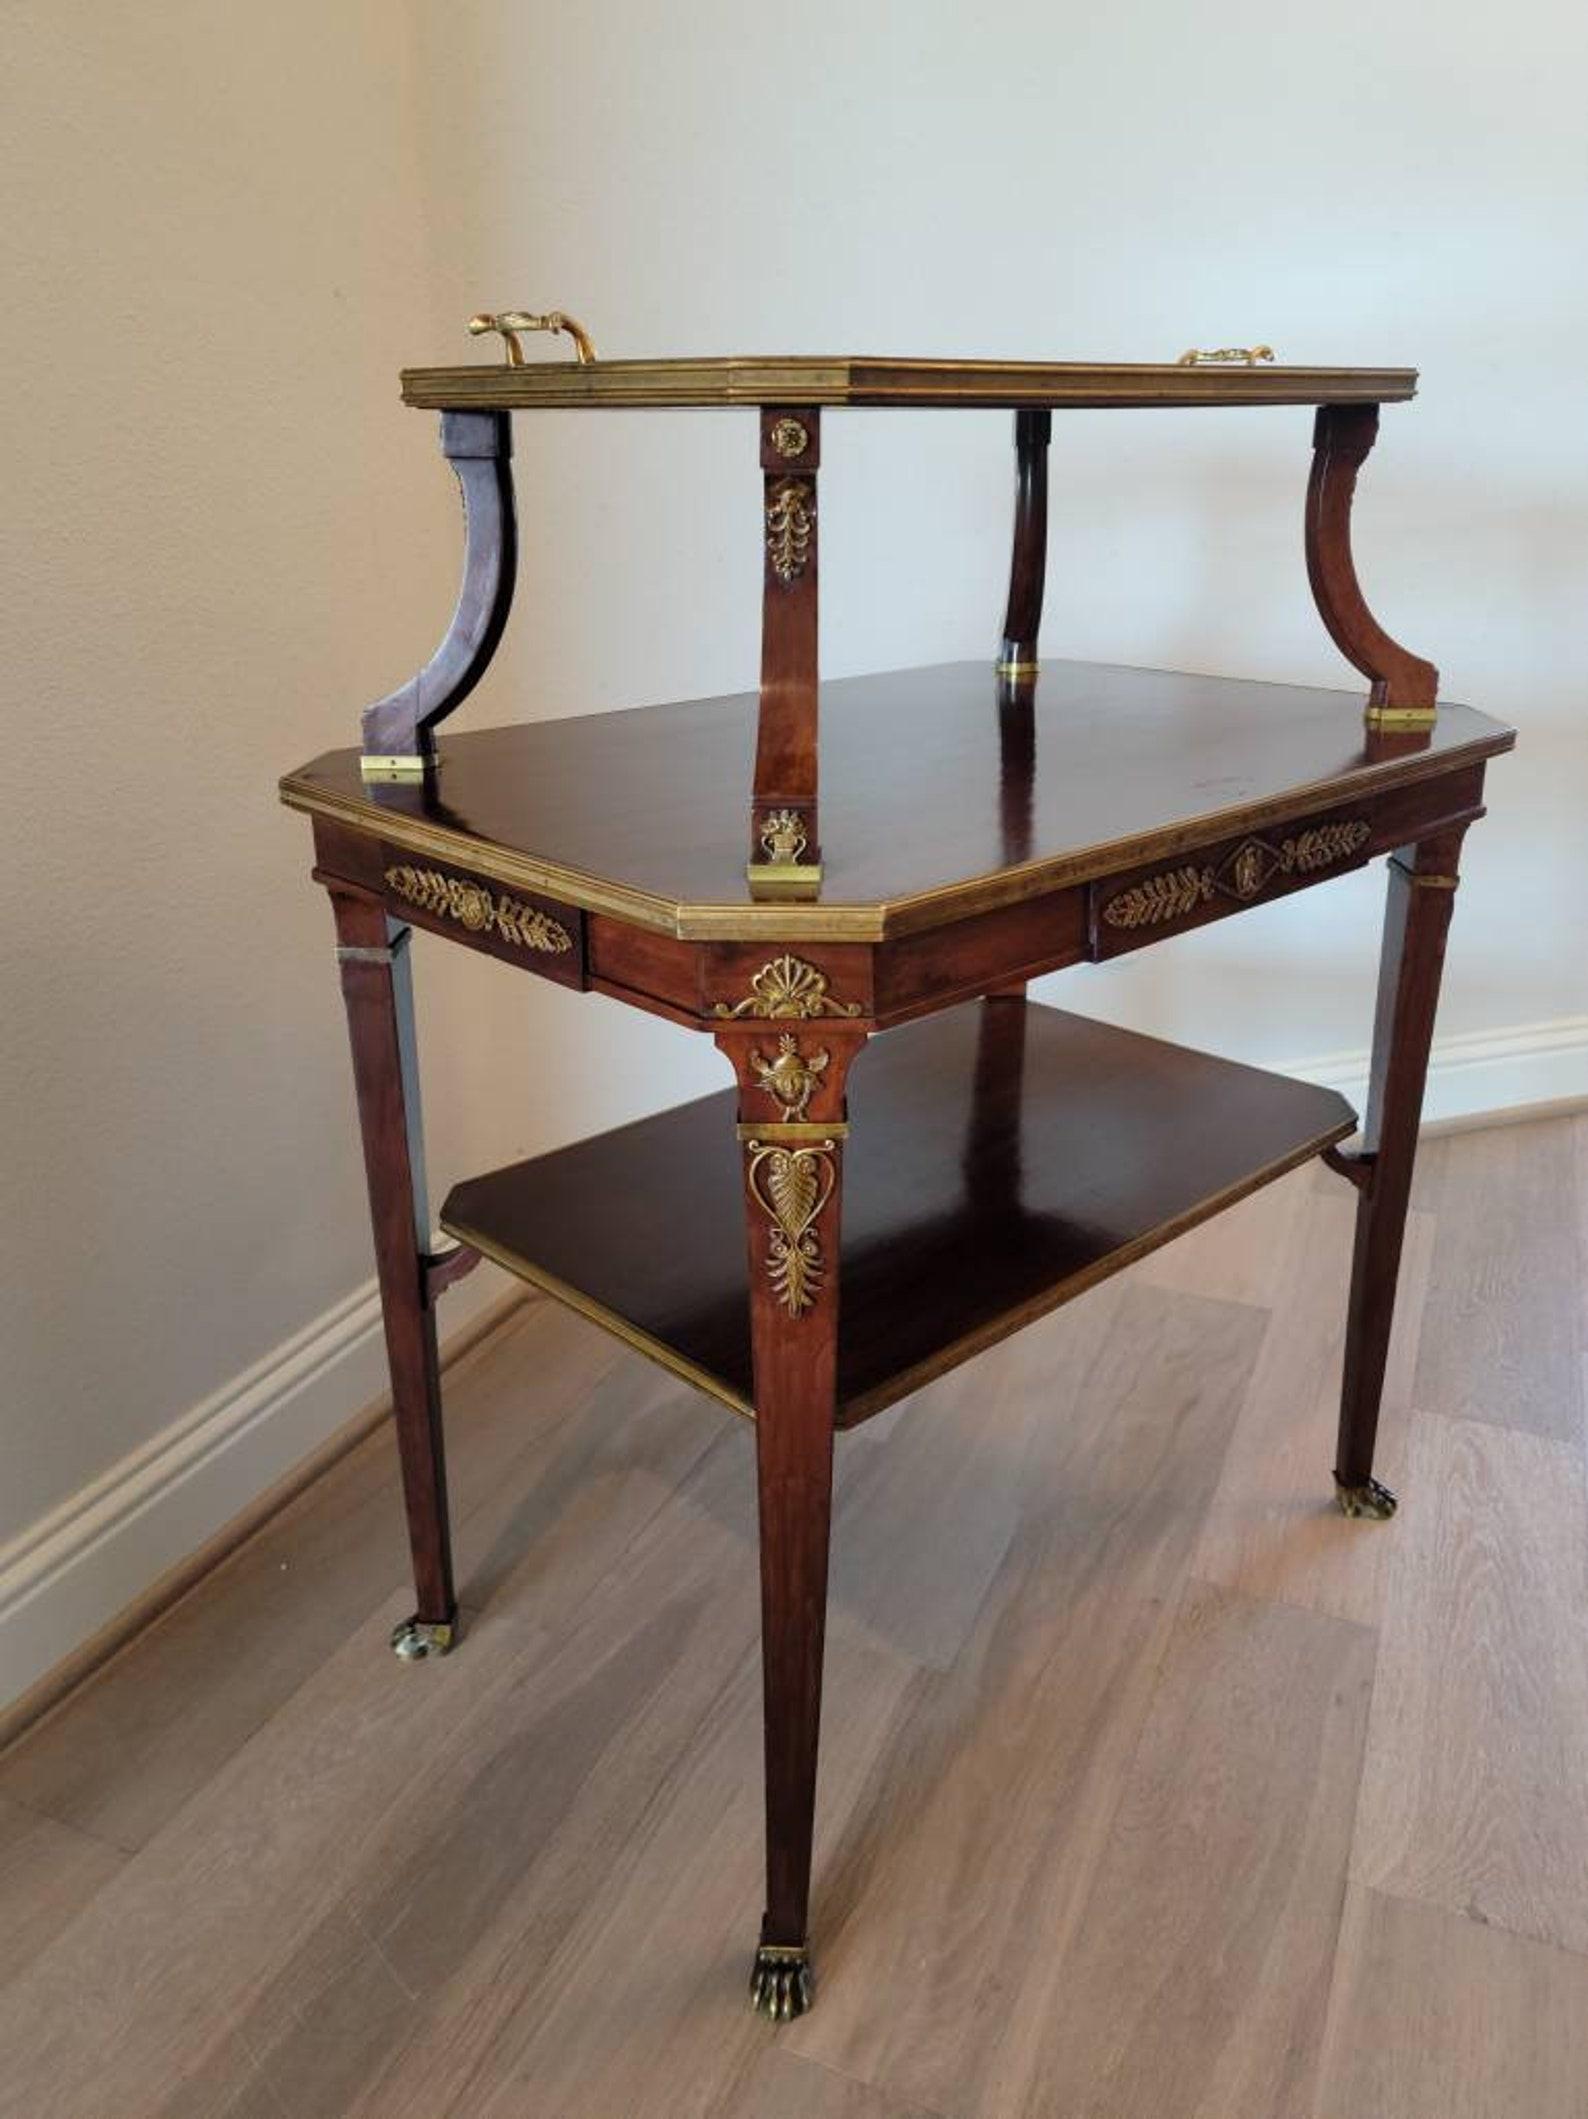 A rare and most attractive French gilt bronze ormolu mounted mahogany tiered tea table with removable tray top by important Parisian furniture maker Maison Krieger. circa 1900

A superb example of the elegant, sophisticated and refined French